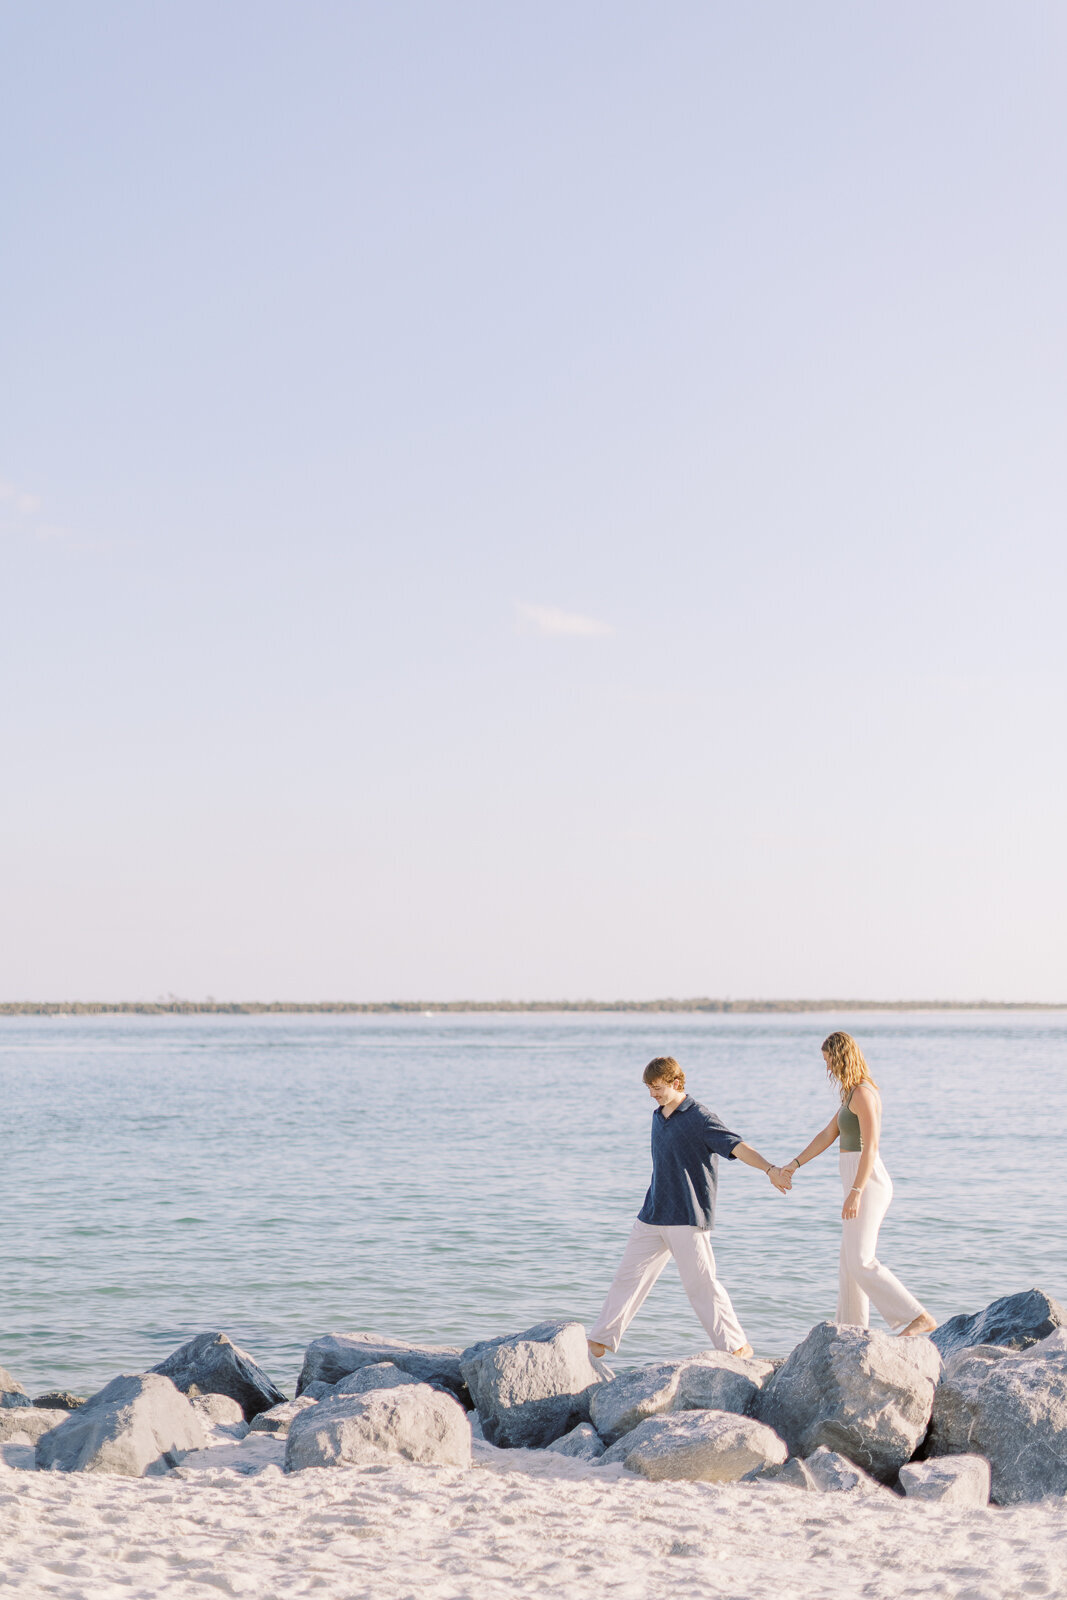 Couple walks together on beach for engagement shoot